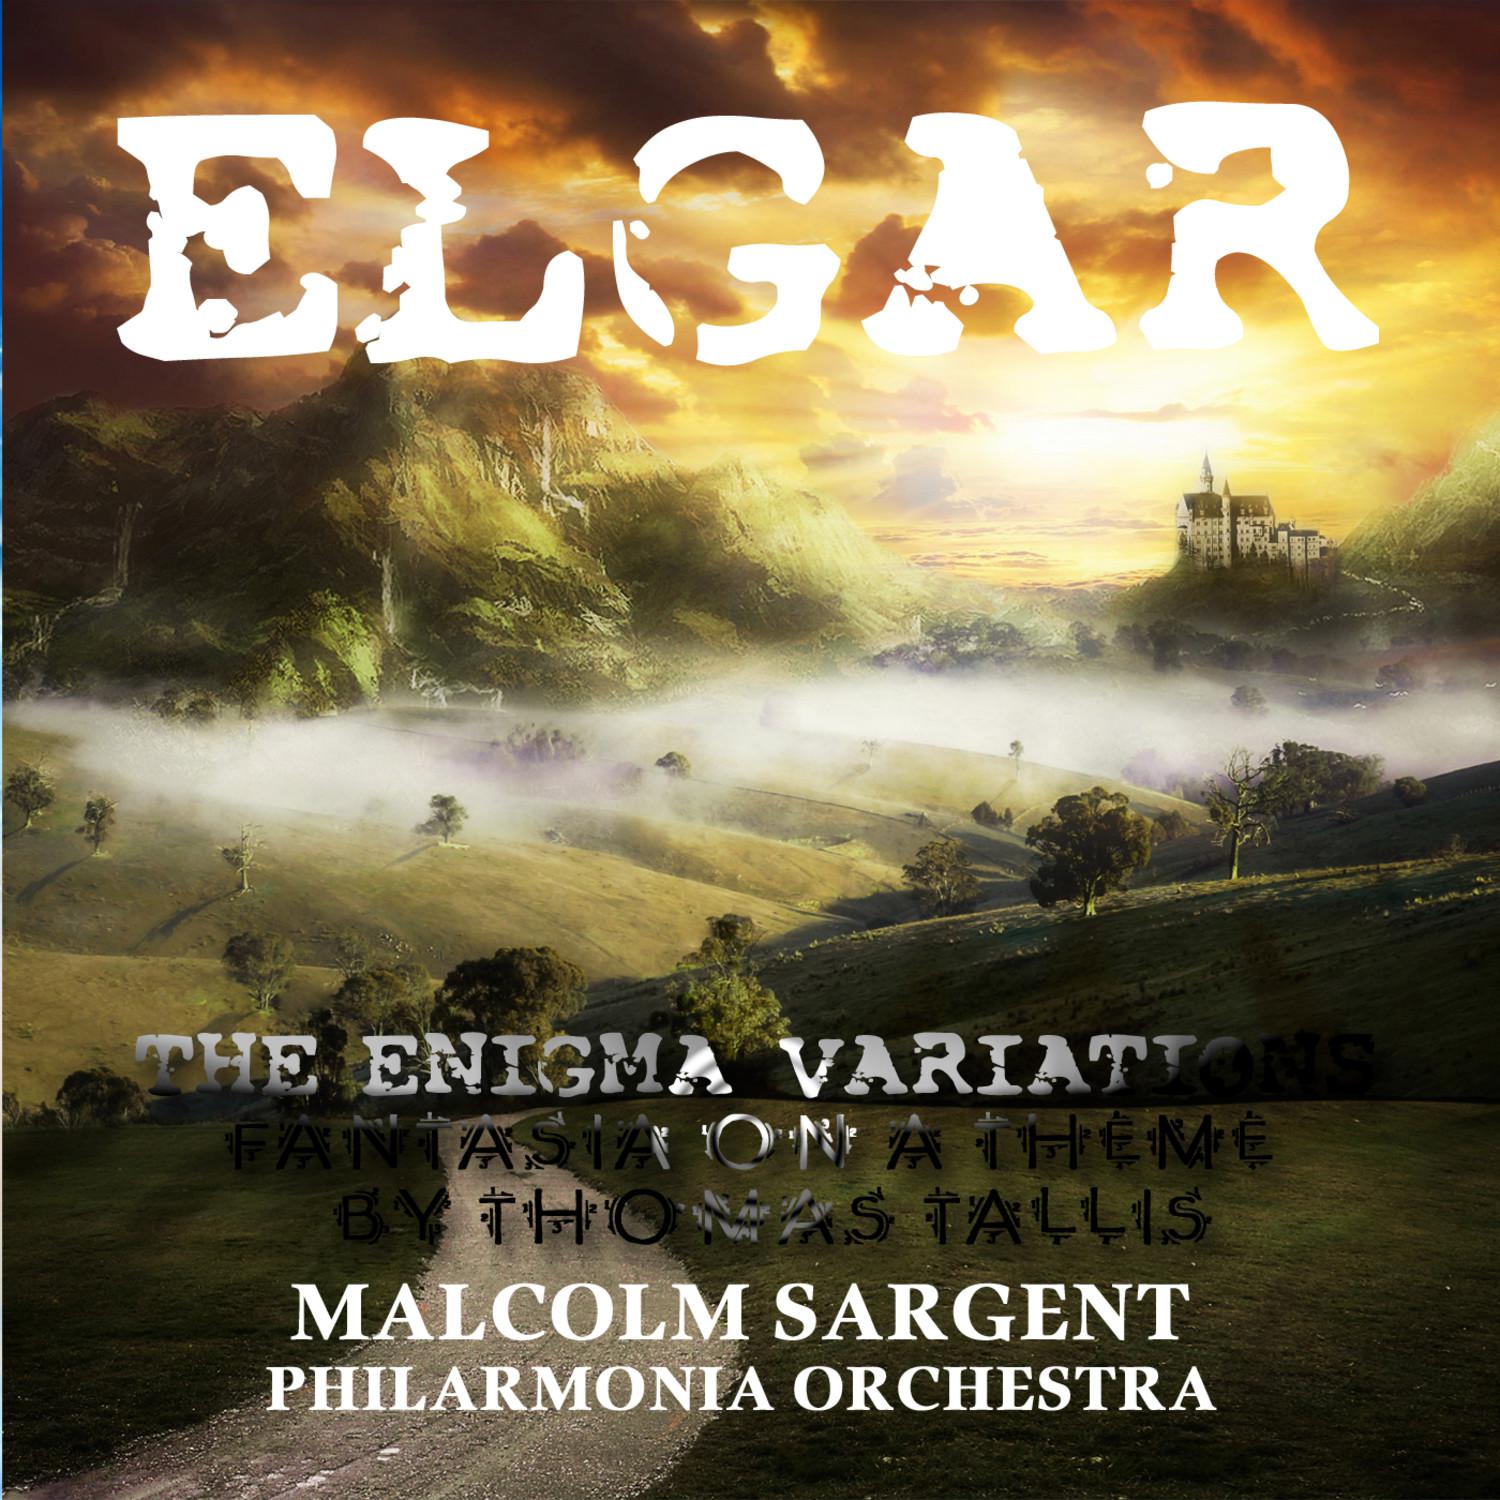 Enigma Variations: G.r.s.